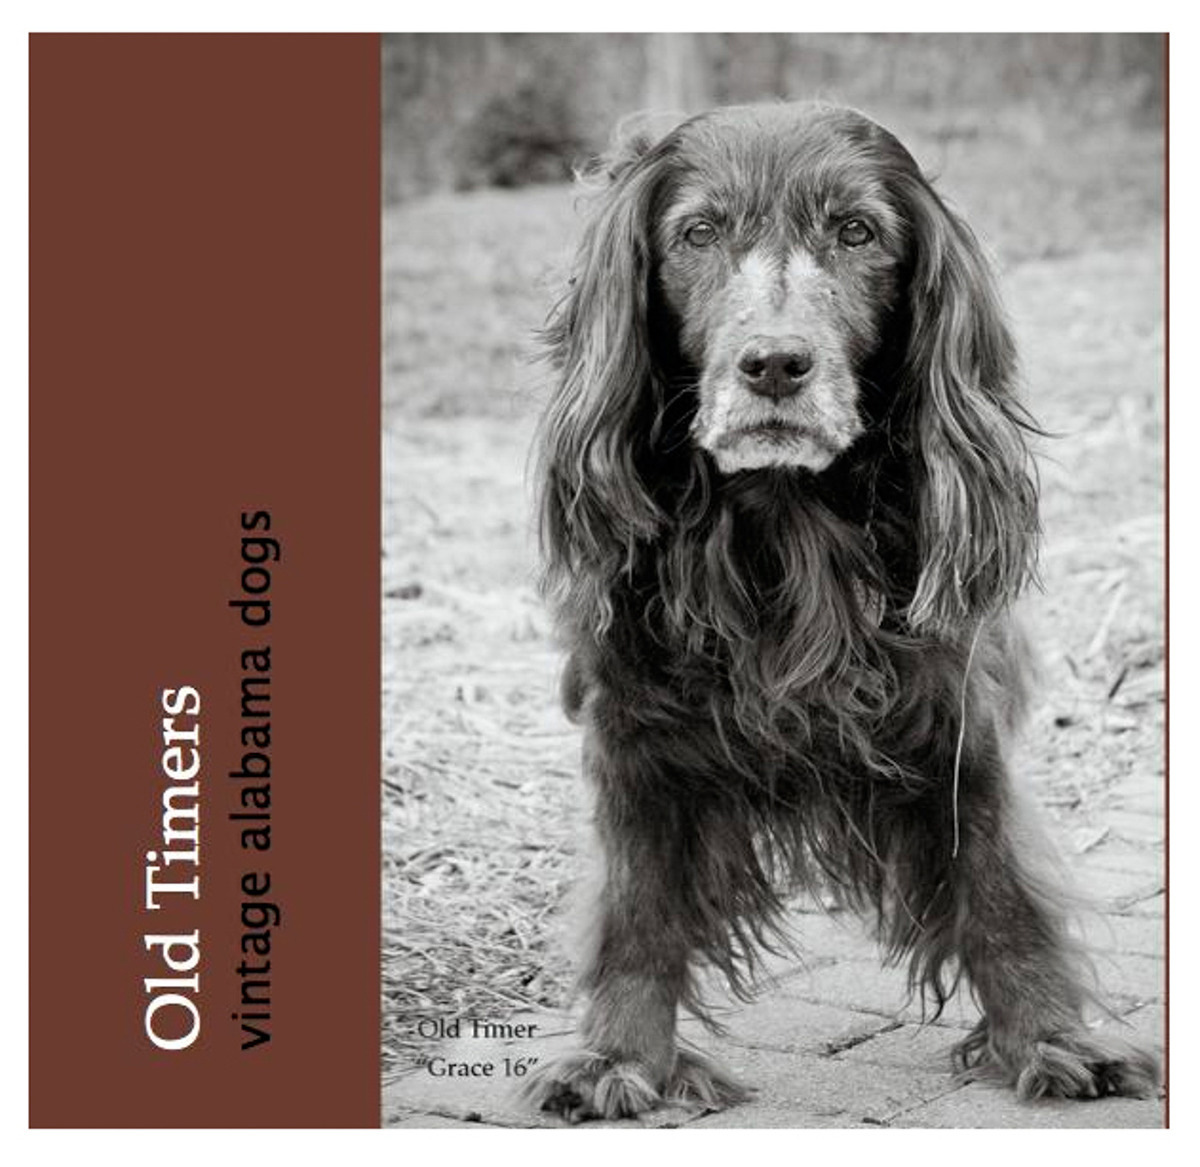 Dog photography coffee table book about older dogs.